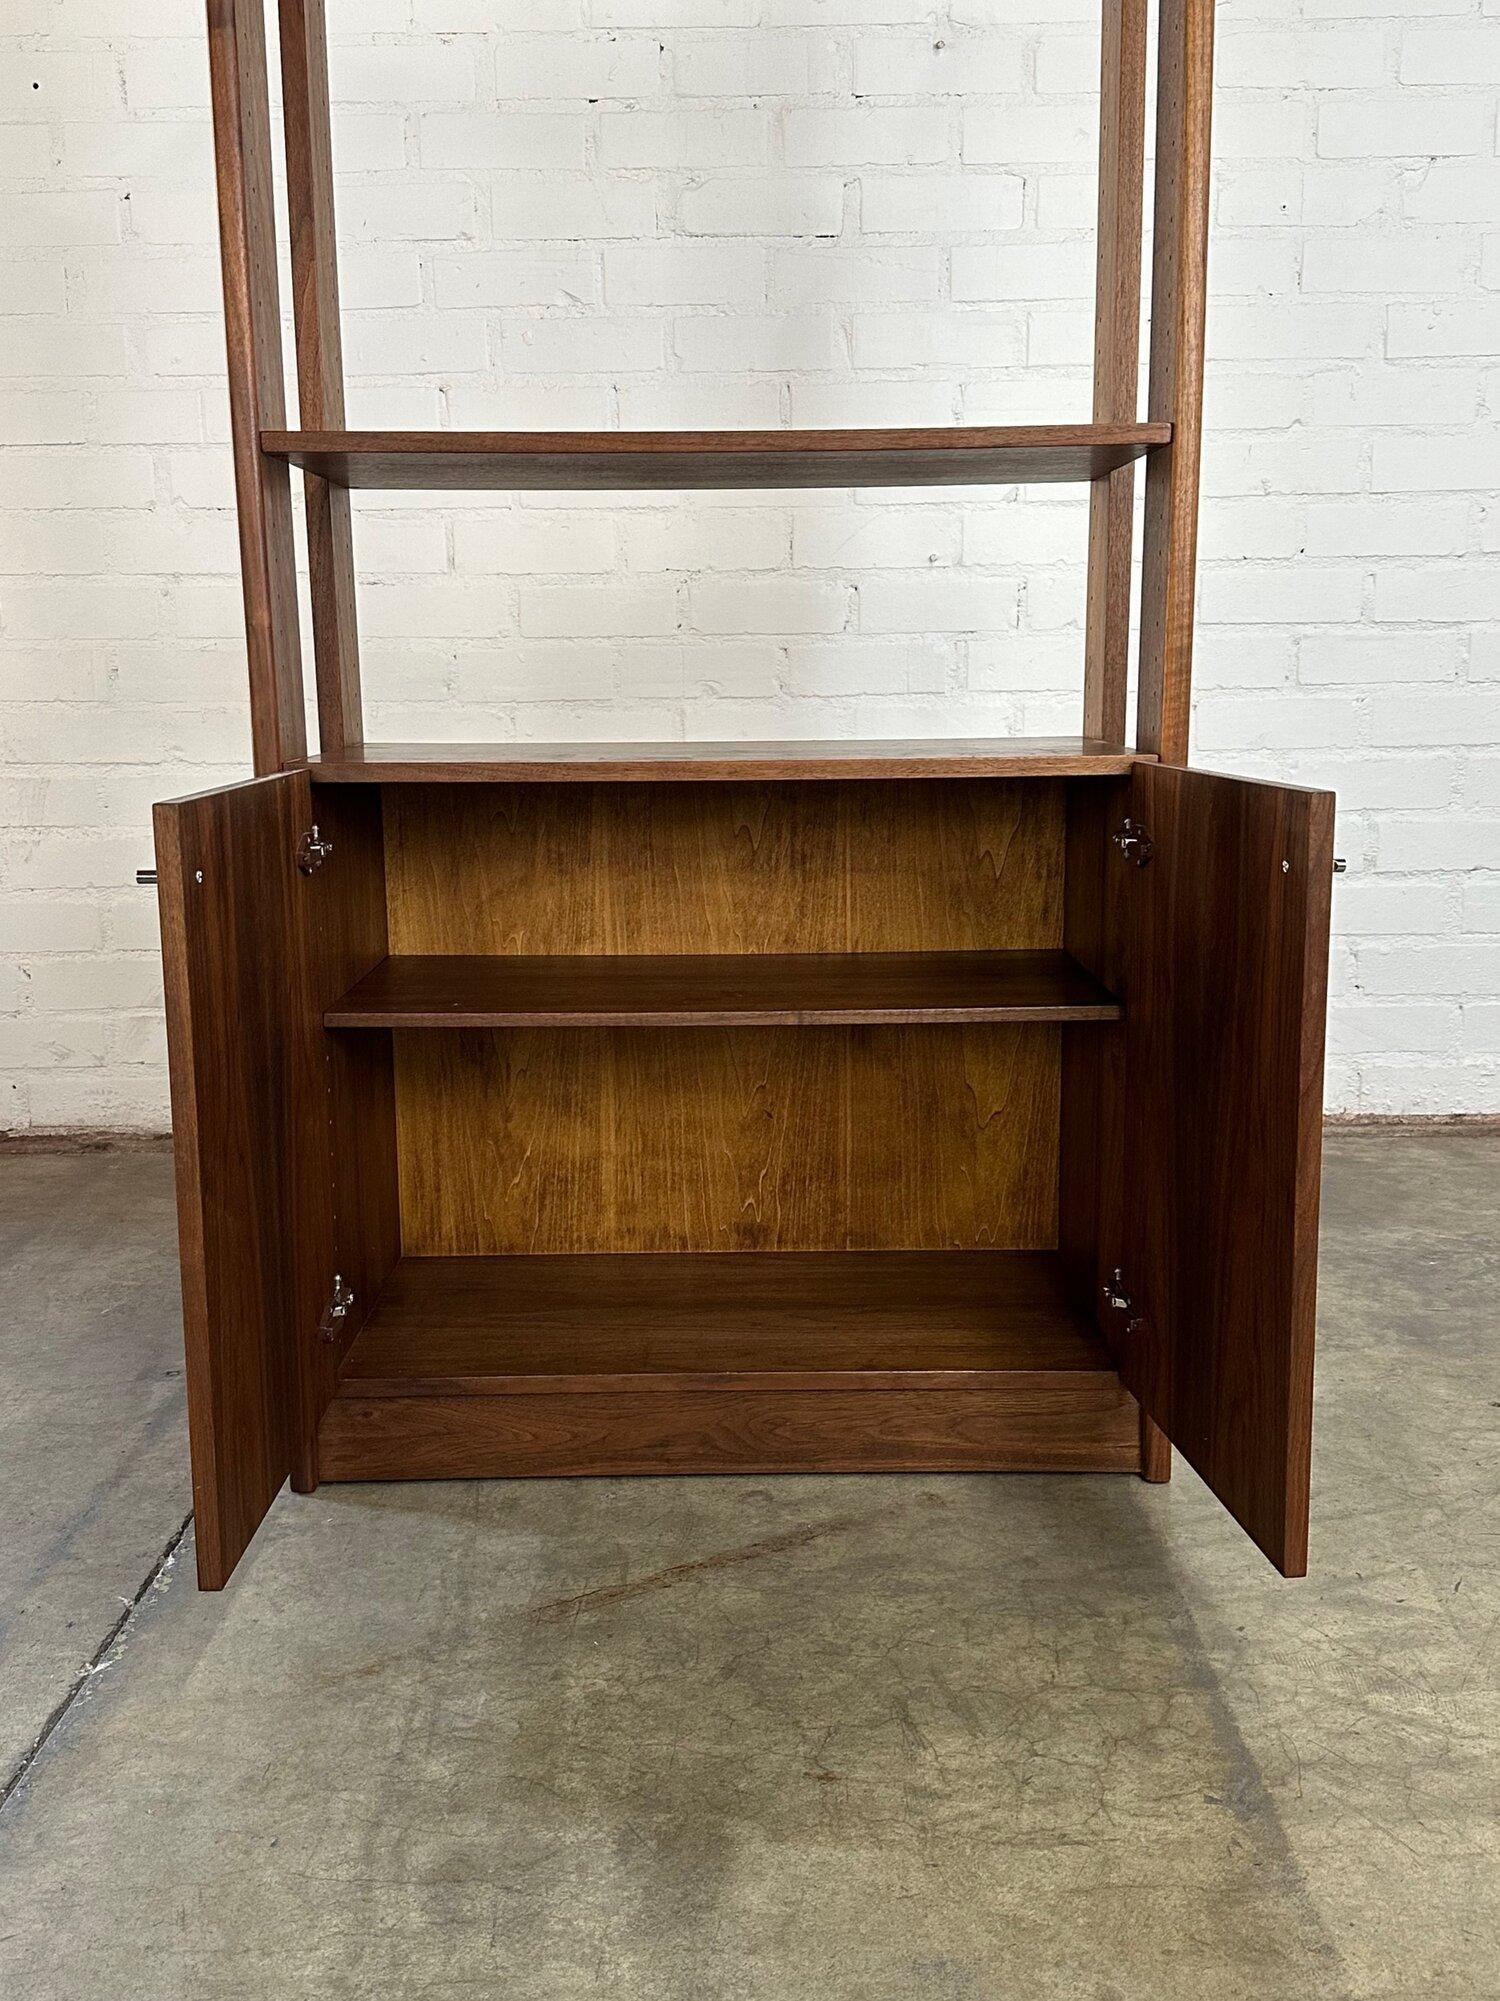 Mid-Century Modern Barzilay style free standing bookcase #2 For Sale